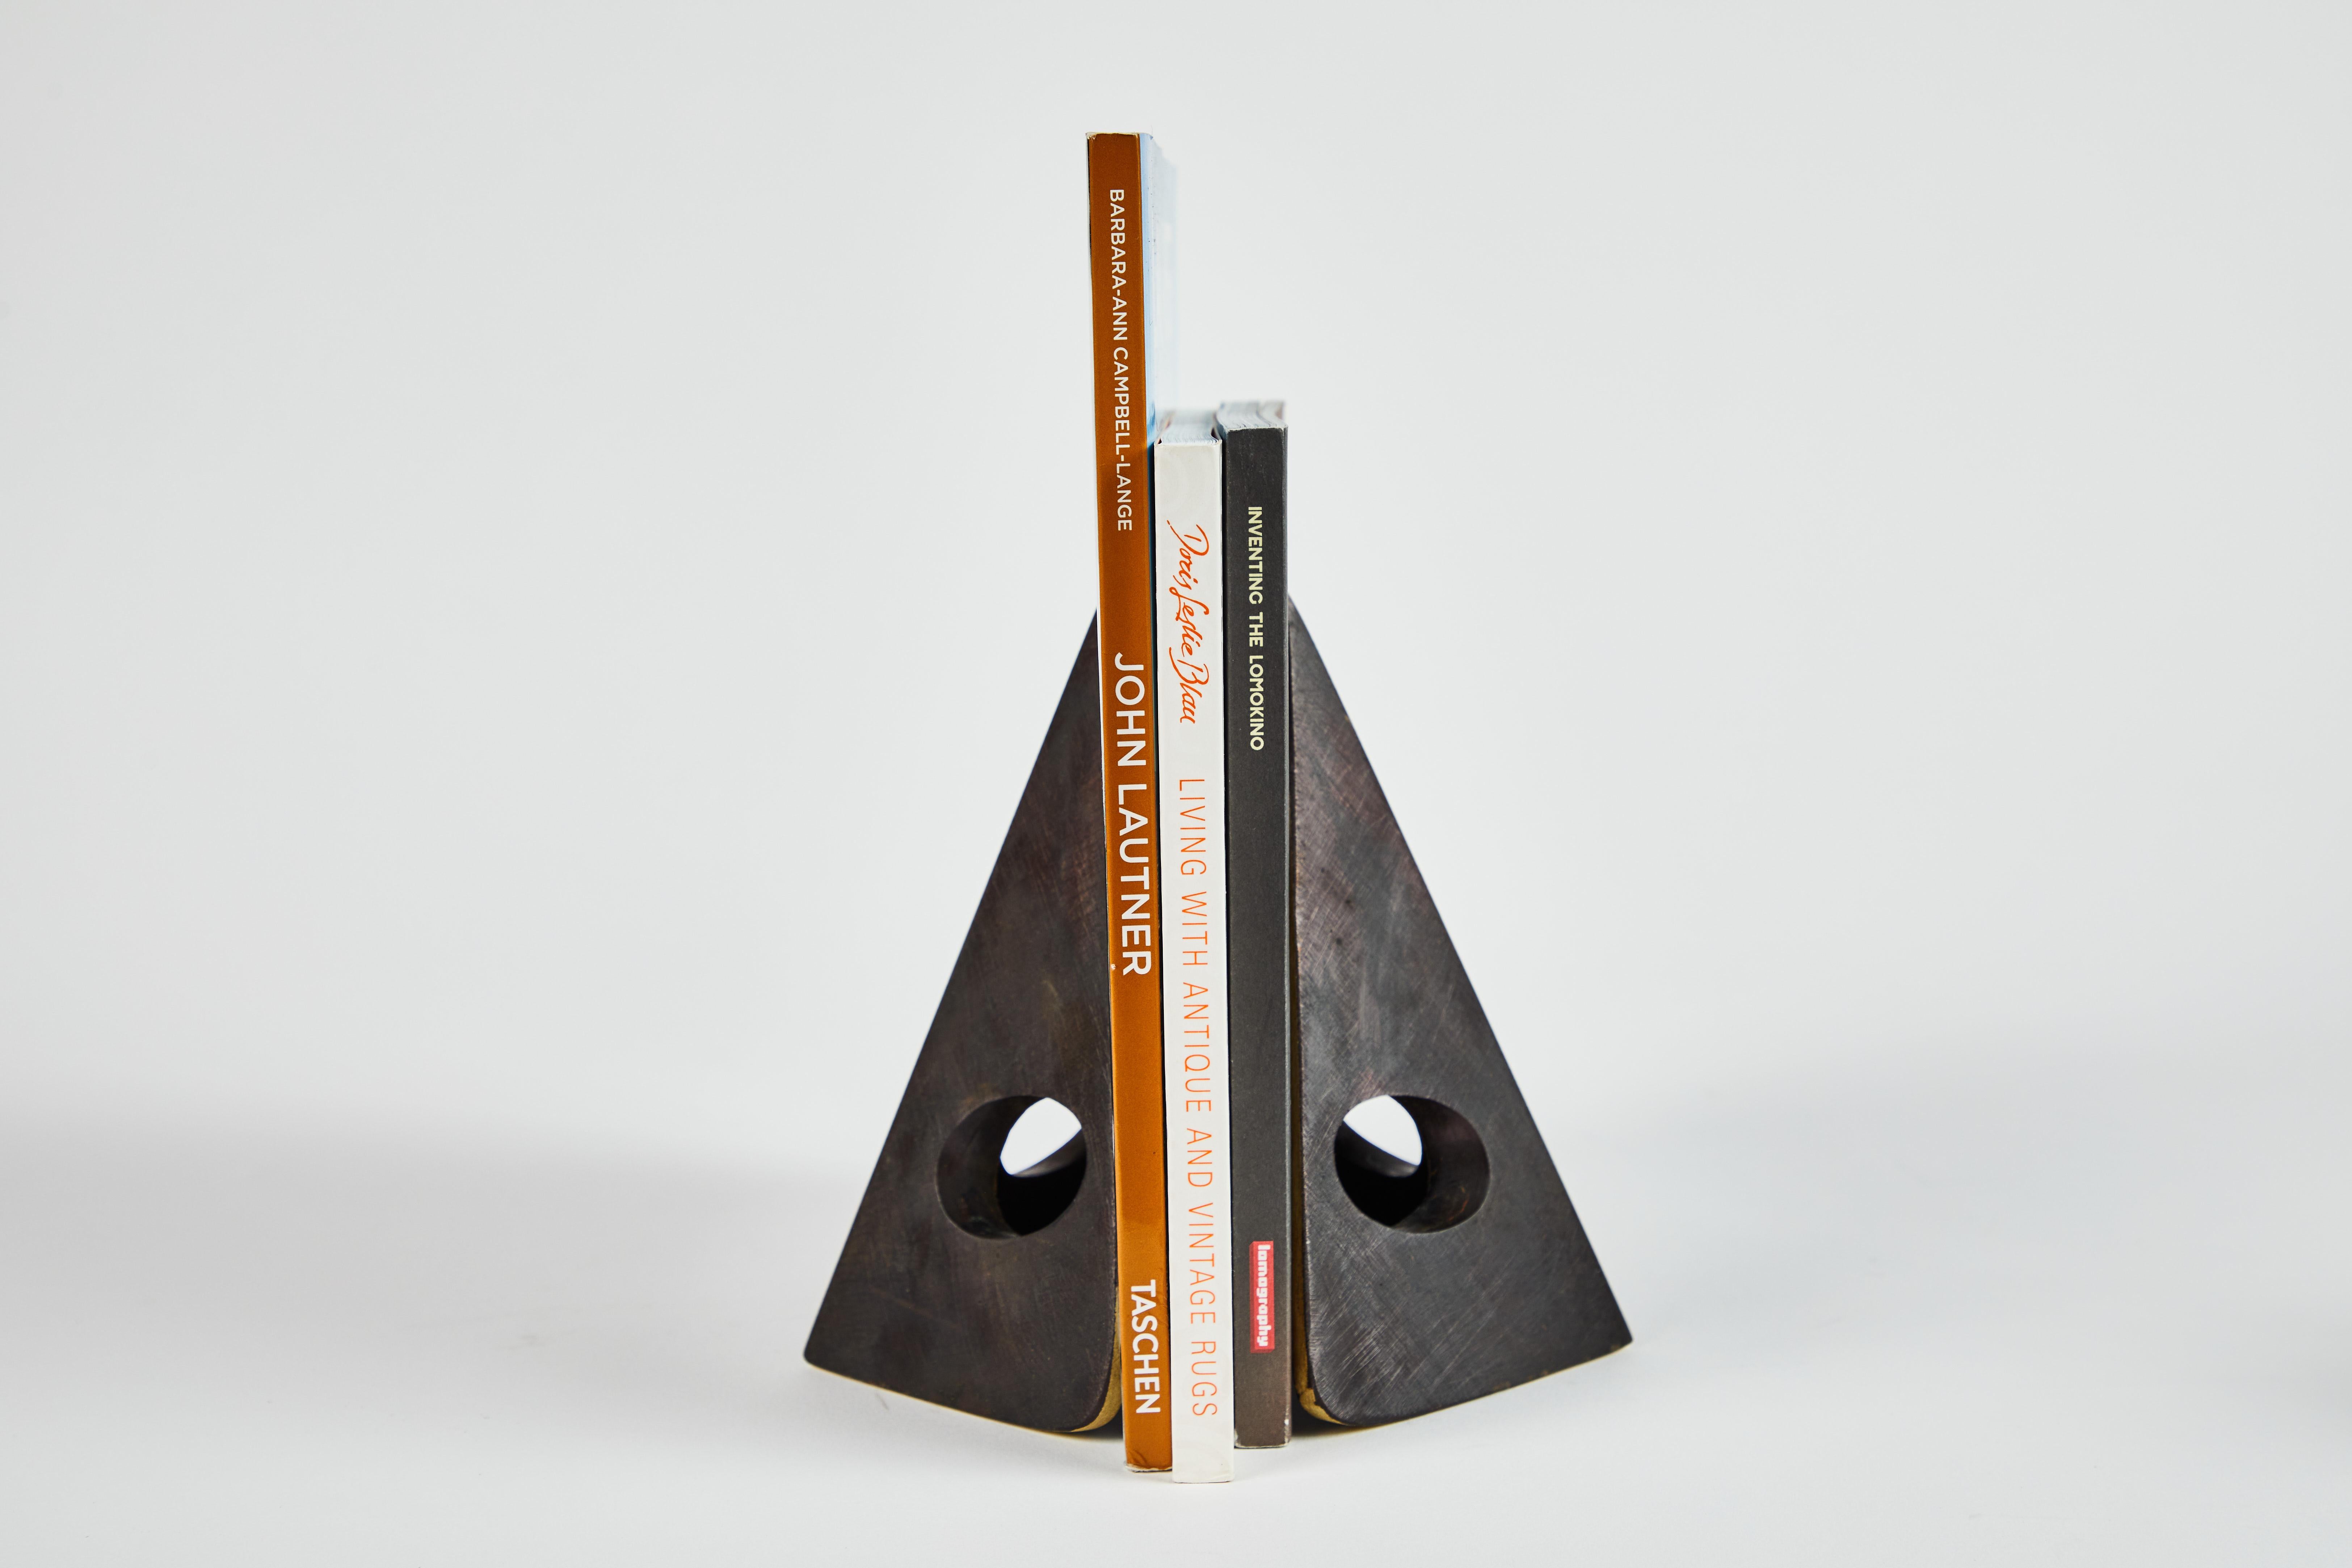 Pair of Carl Auböck Model #4100 patinated brass bookends. Designed in the 1950s, this incredibly refined and sculptural pair of bookends are executed in patinated brass. 

Price is for the pair. Two in stock ready to ship. Available in unlimited